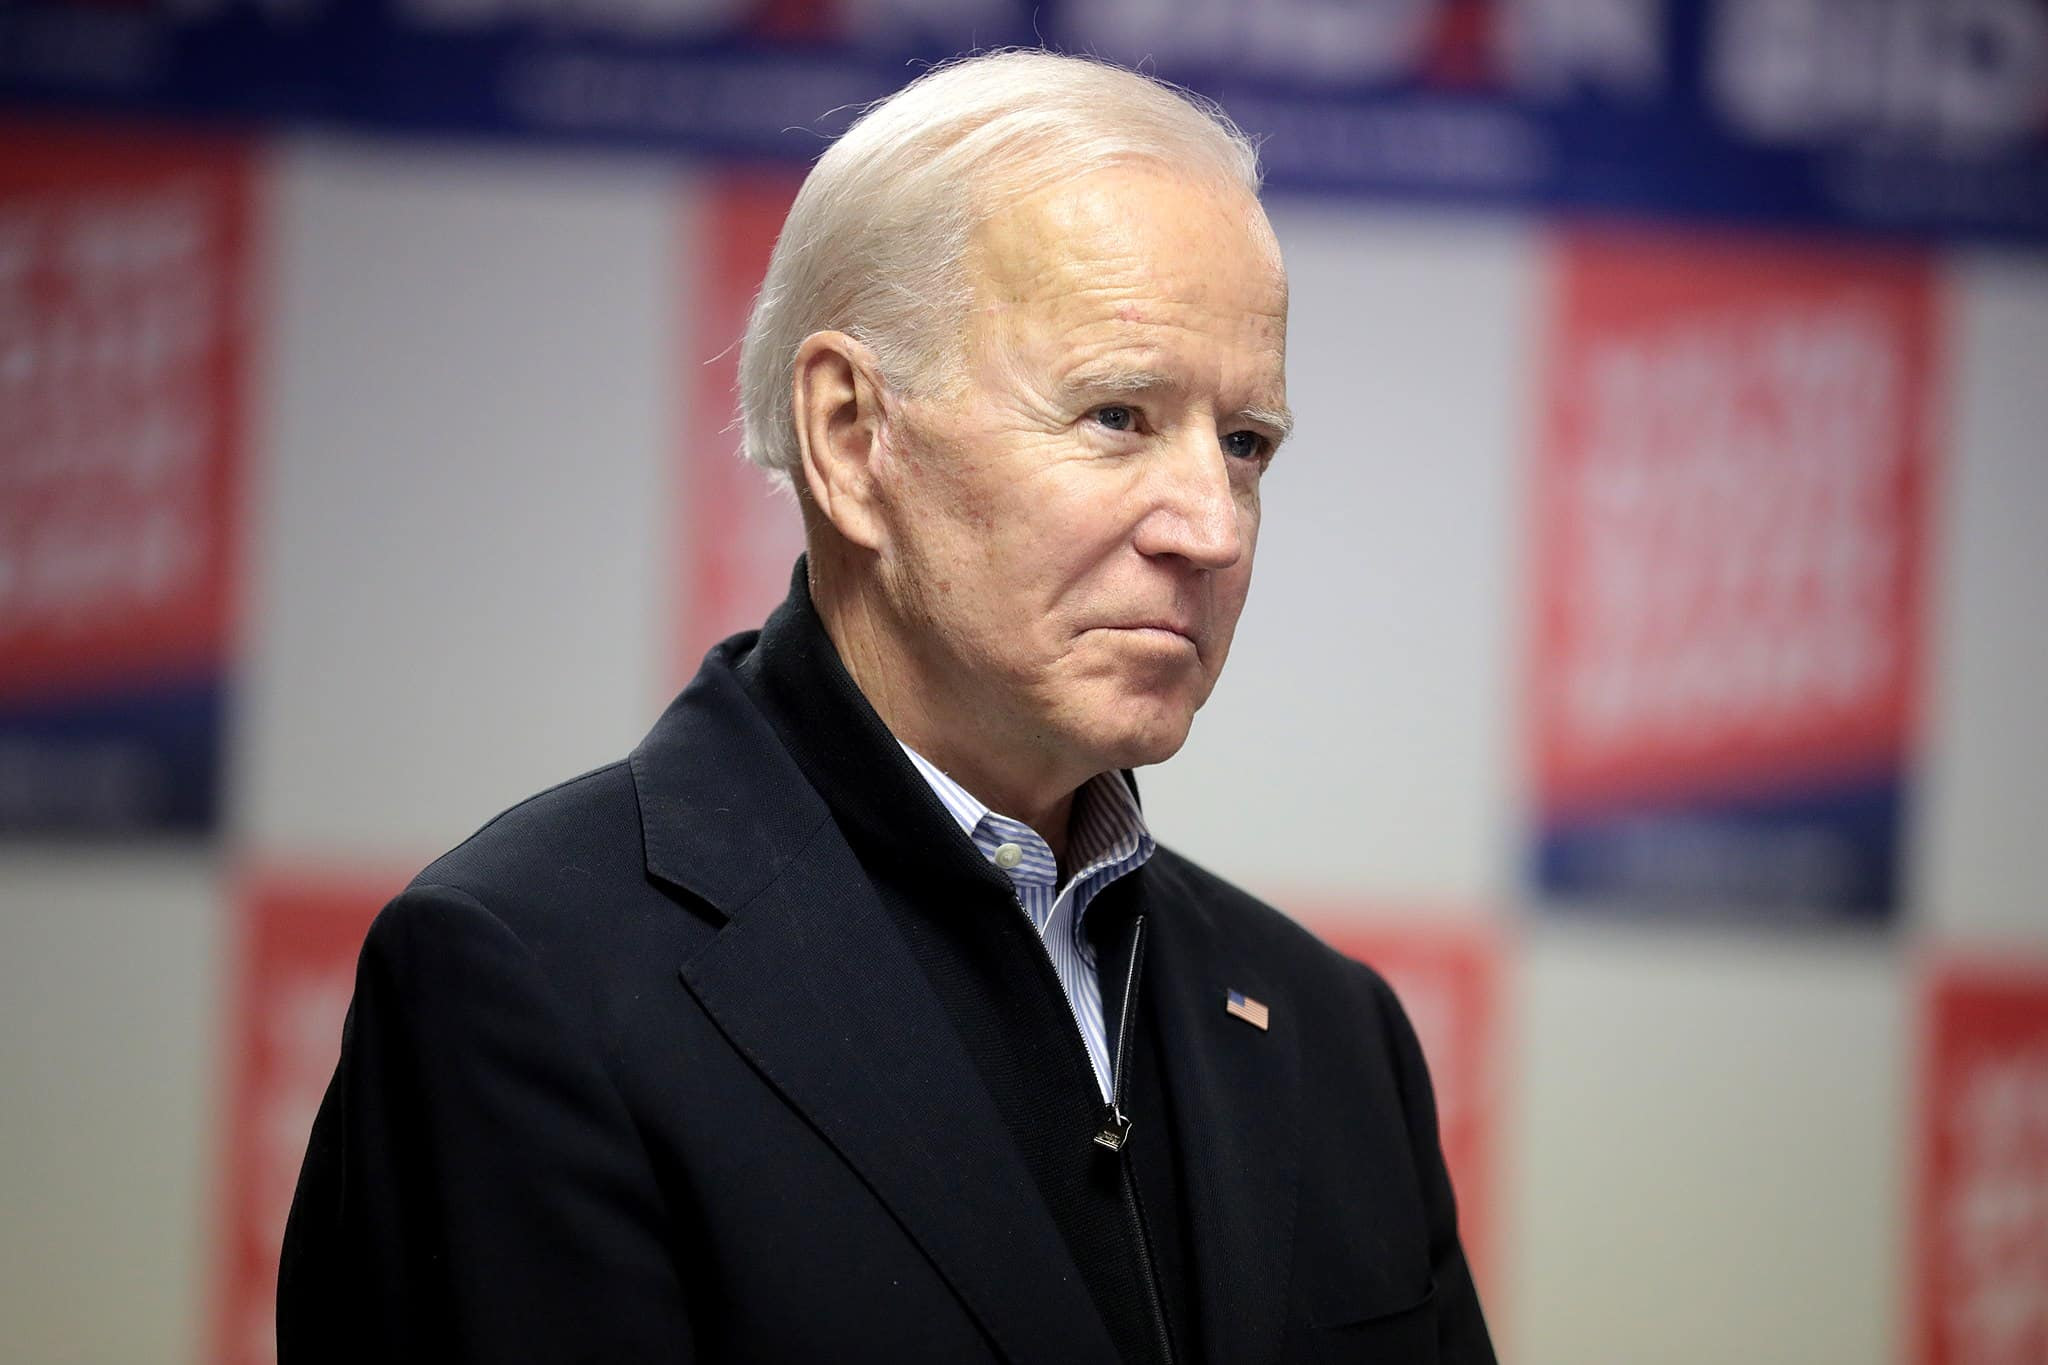 Republicans Order Biden To Pay Up